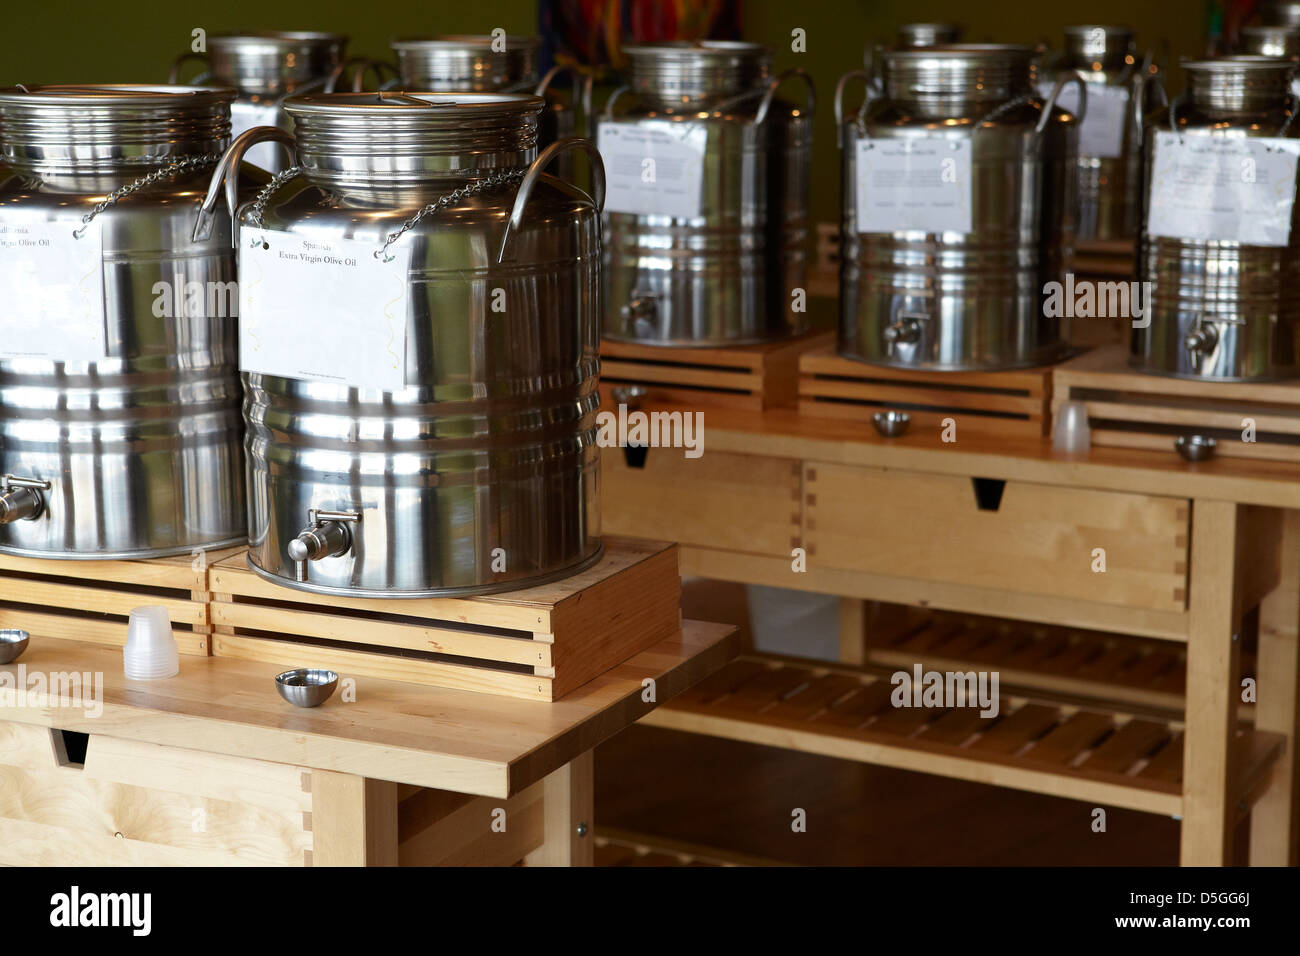 https://c8.alamy.com/comp/D5GG6J/containers-of-olive-oil-and-vinegar-at-store-samples-are-available-D5GG6J.jpg